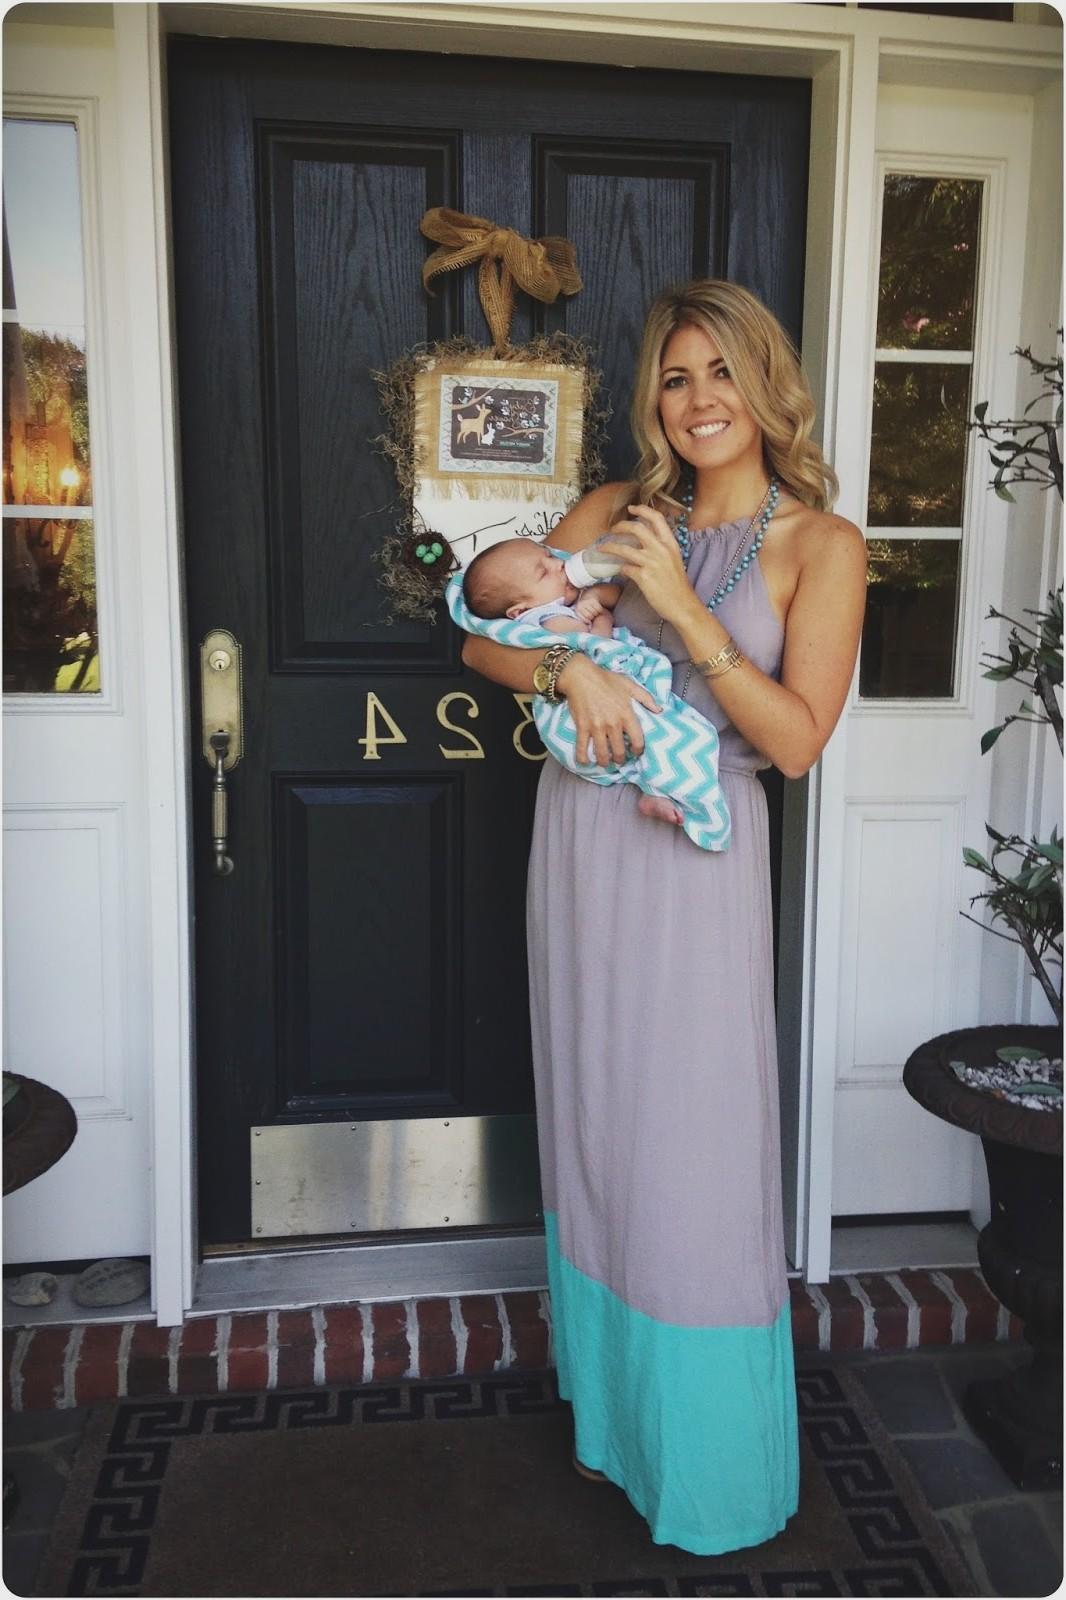 Full Size of Baby Shower:maternity Boutique Cute Maternity Dresses For Baby Shower Affordable Maternity Dresses For Baby Shower What To Wear To My Baby Shower Best Maternity Dresses For Baby Shower Cheap Maternity Dresses For Baby Showers Celebrity Baby Shower Dresses Trendy Maternity Clothes